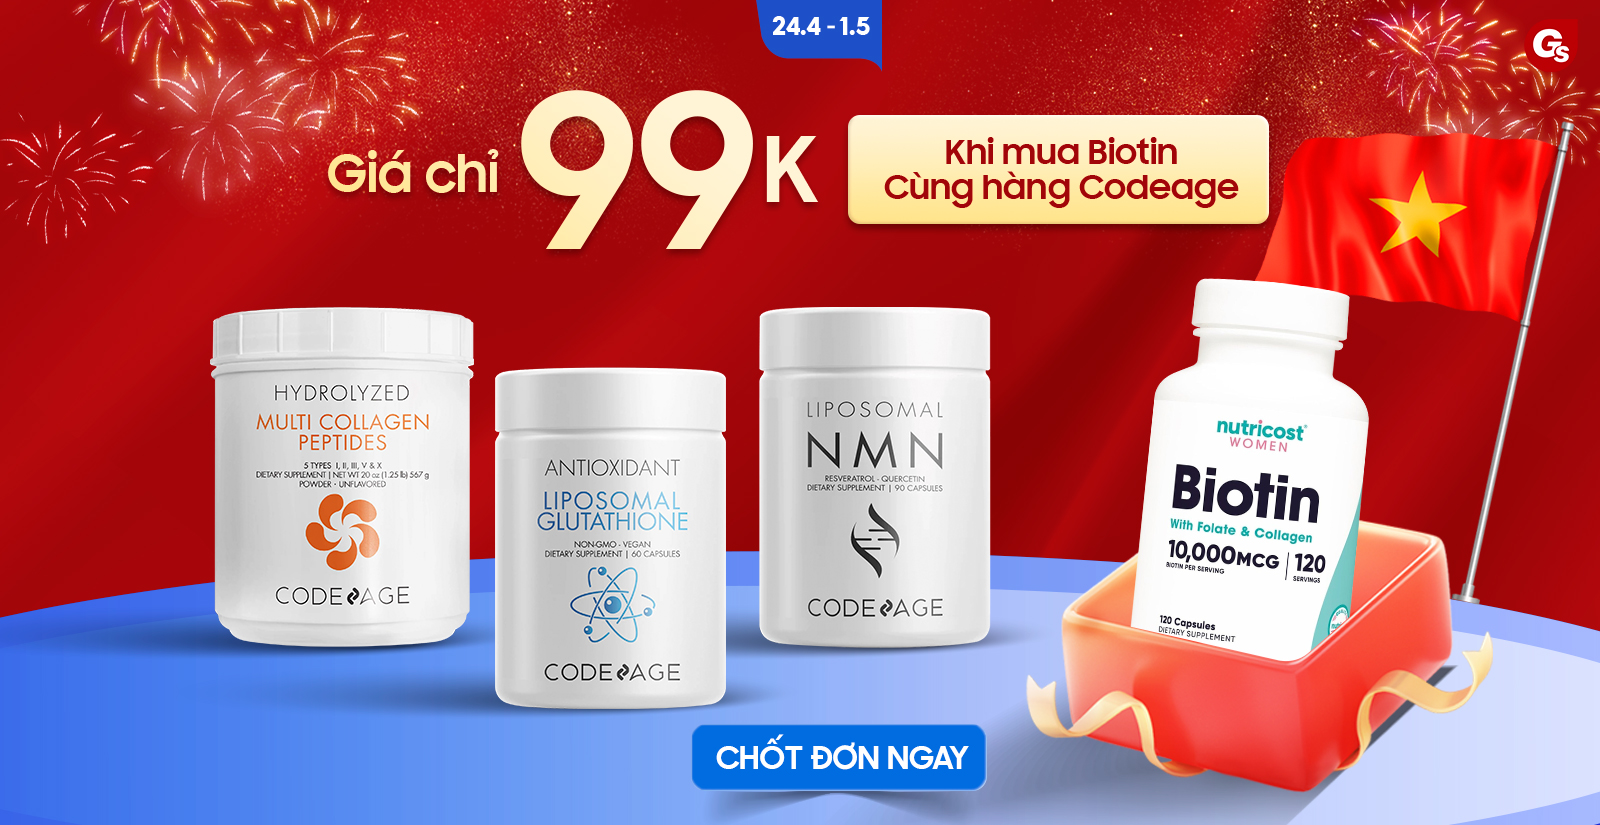 sale-vitaxtrong-gymstore